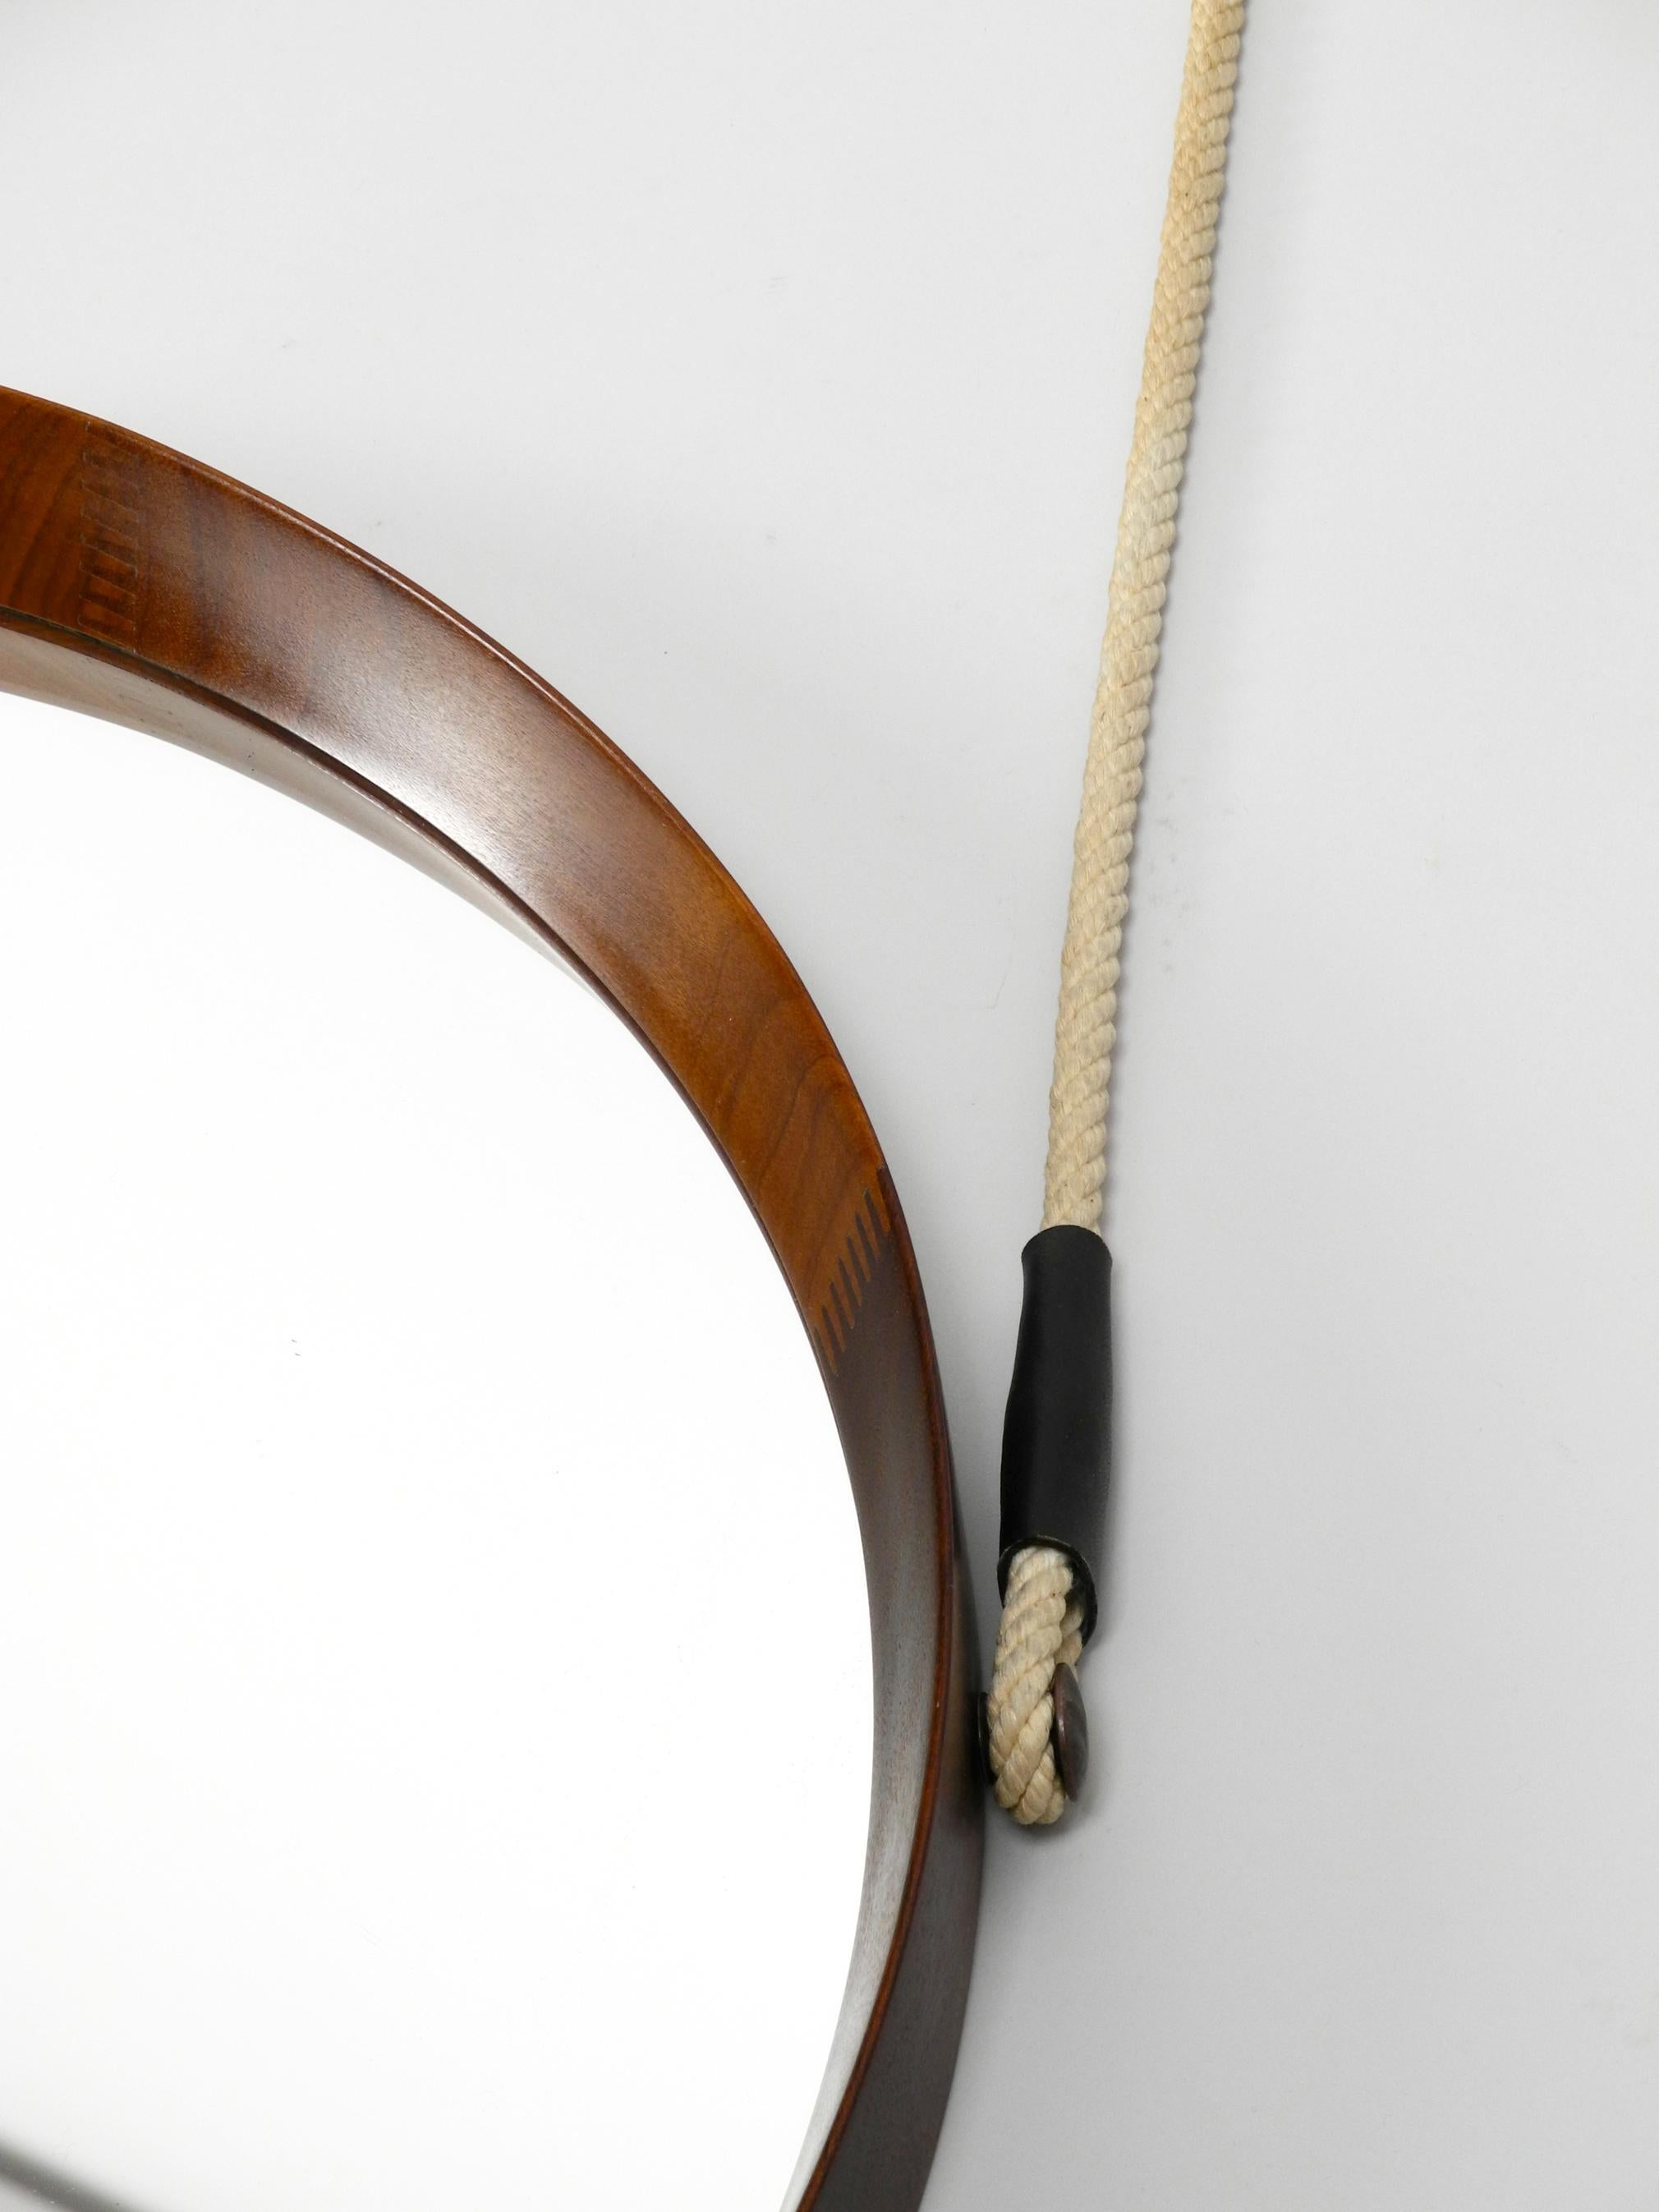 1960s Large Teak Wall Mirror with Thick Rope Made of Natural Fiber Made in Italy 4